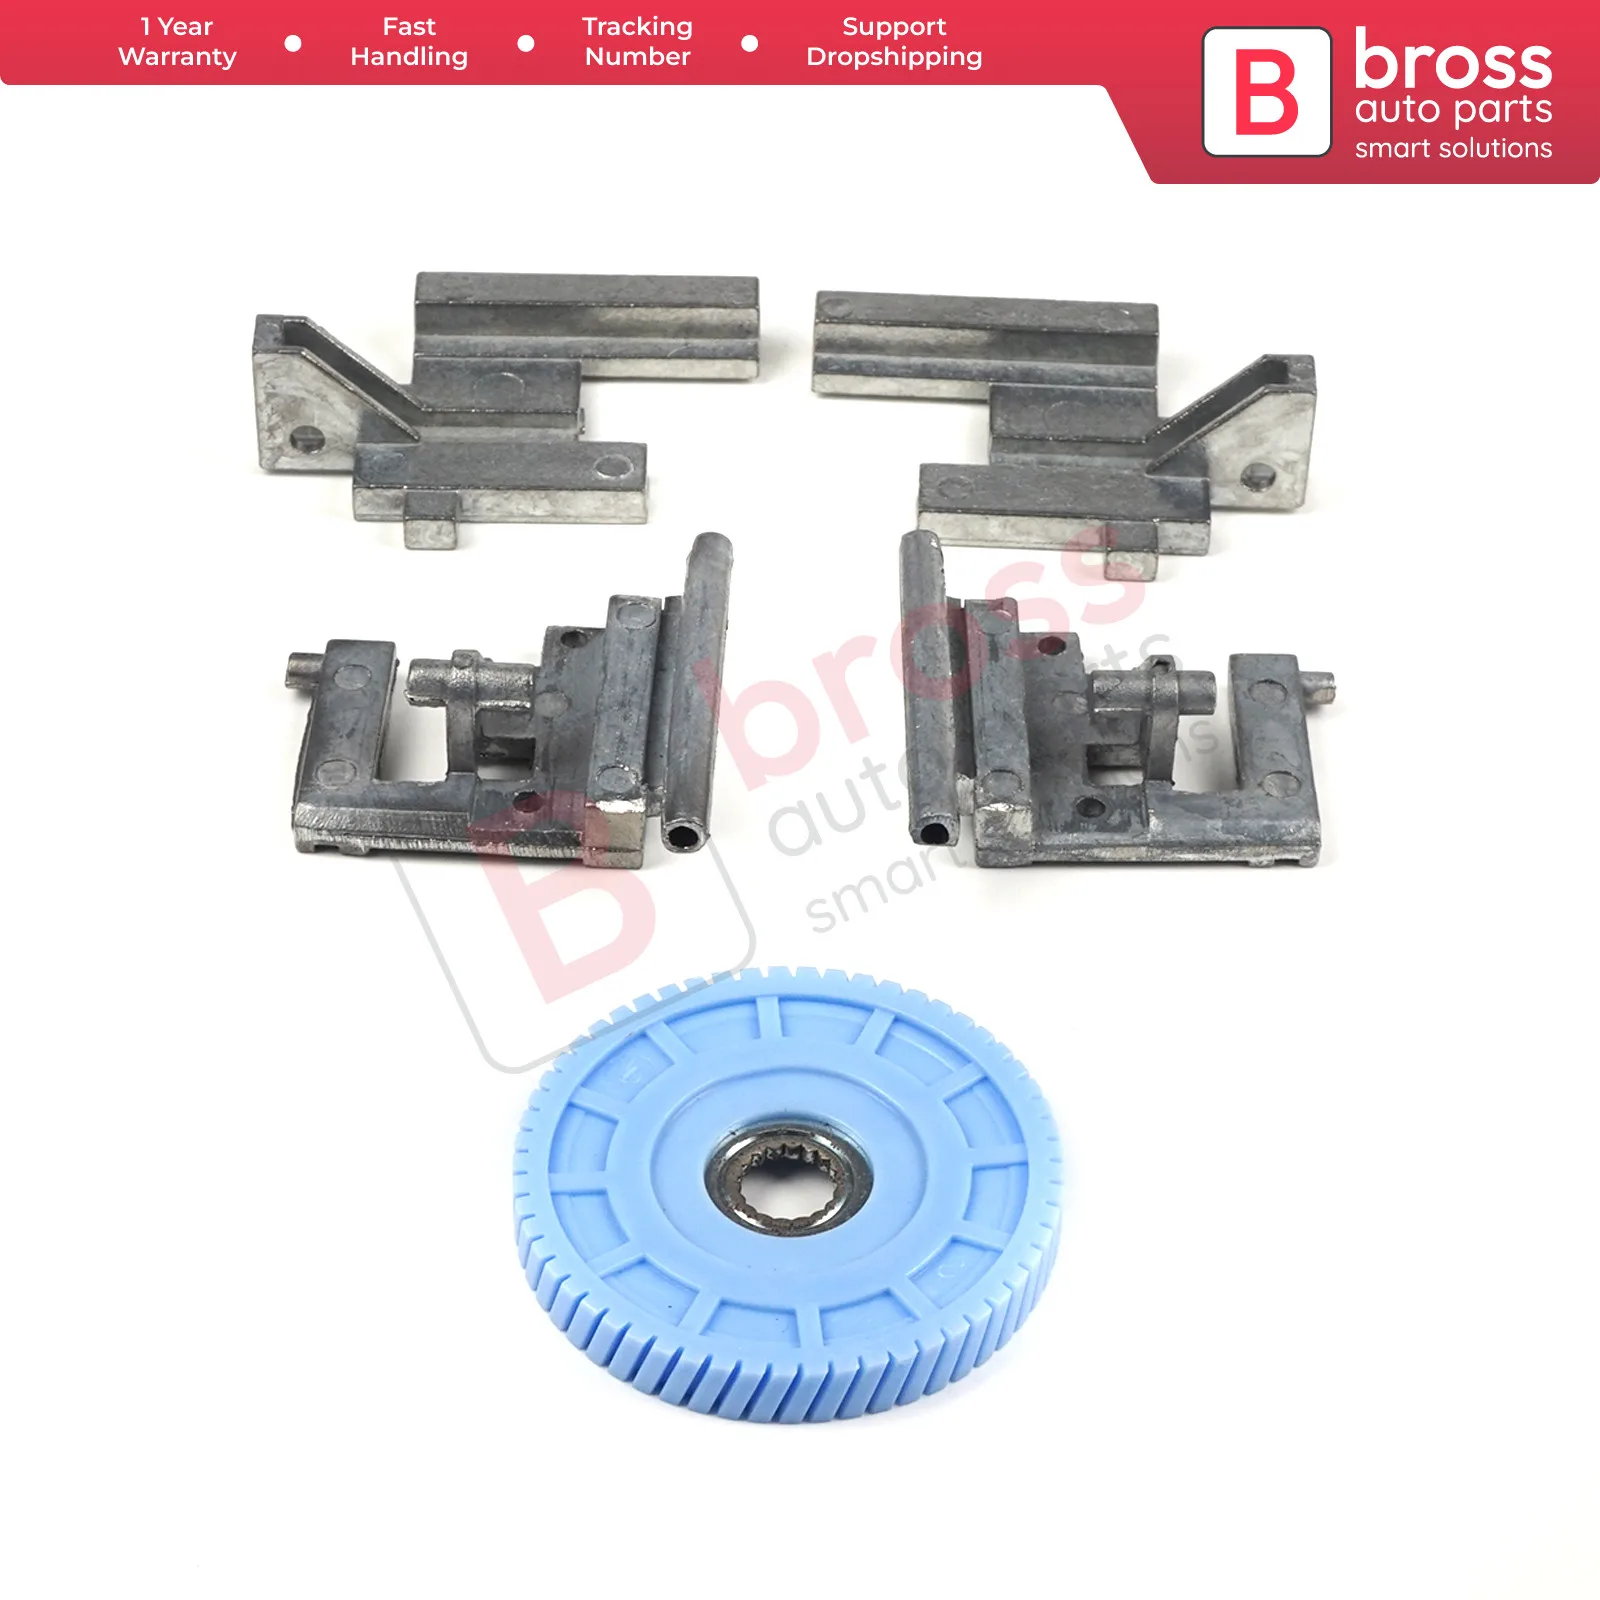 

Bross Auto Parts BSR18+BSR42 Sunroof Repair Metal Brackets Kit and Motor Gear For Renault Clio 1995 - 2006 Ship From Turkey